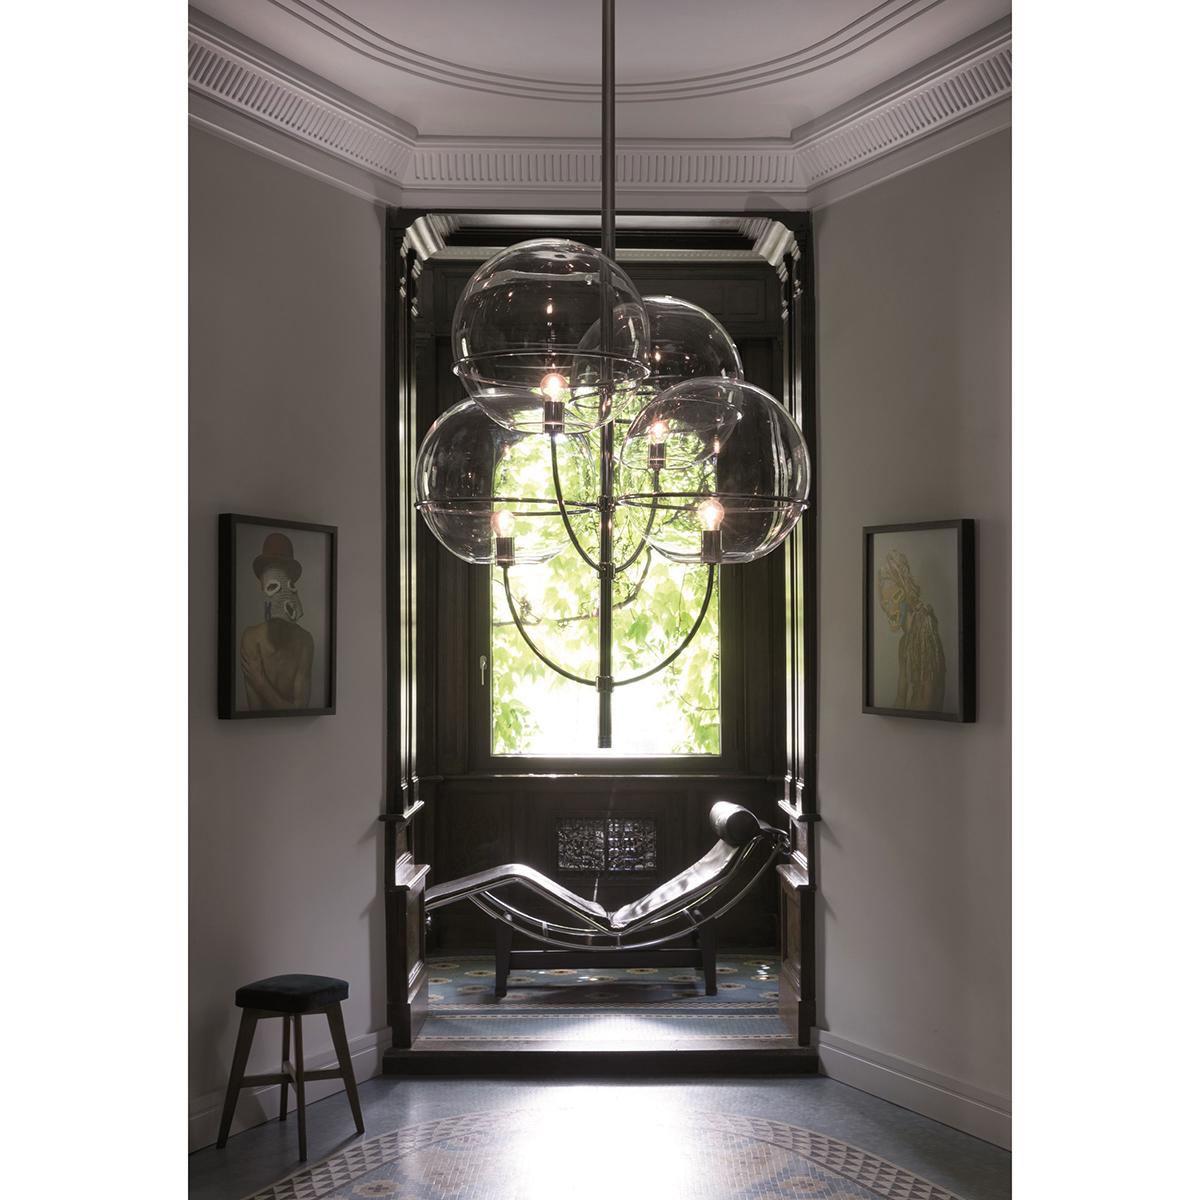 Suspension lamp 'Lyndon' designed by Vico Magistretti in 1977.
Indoor suspension lamp. Metal structure, globes in transparent glass. Manufactured by Oluce, Italy.

Lyndon is a project by Vico Magistretti created in 1977 and developed over the years